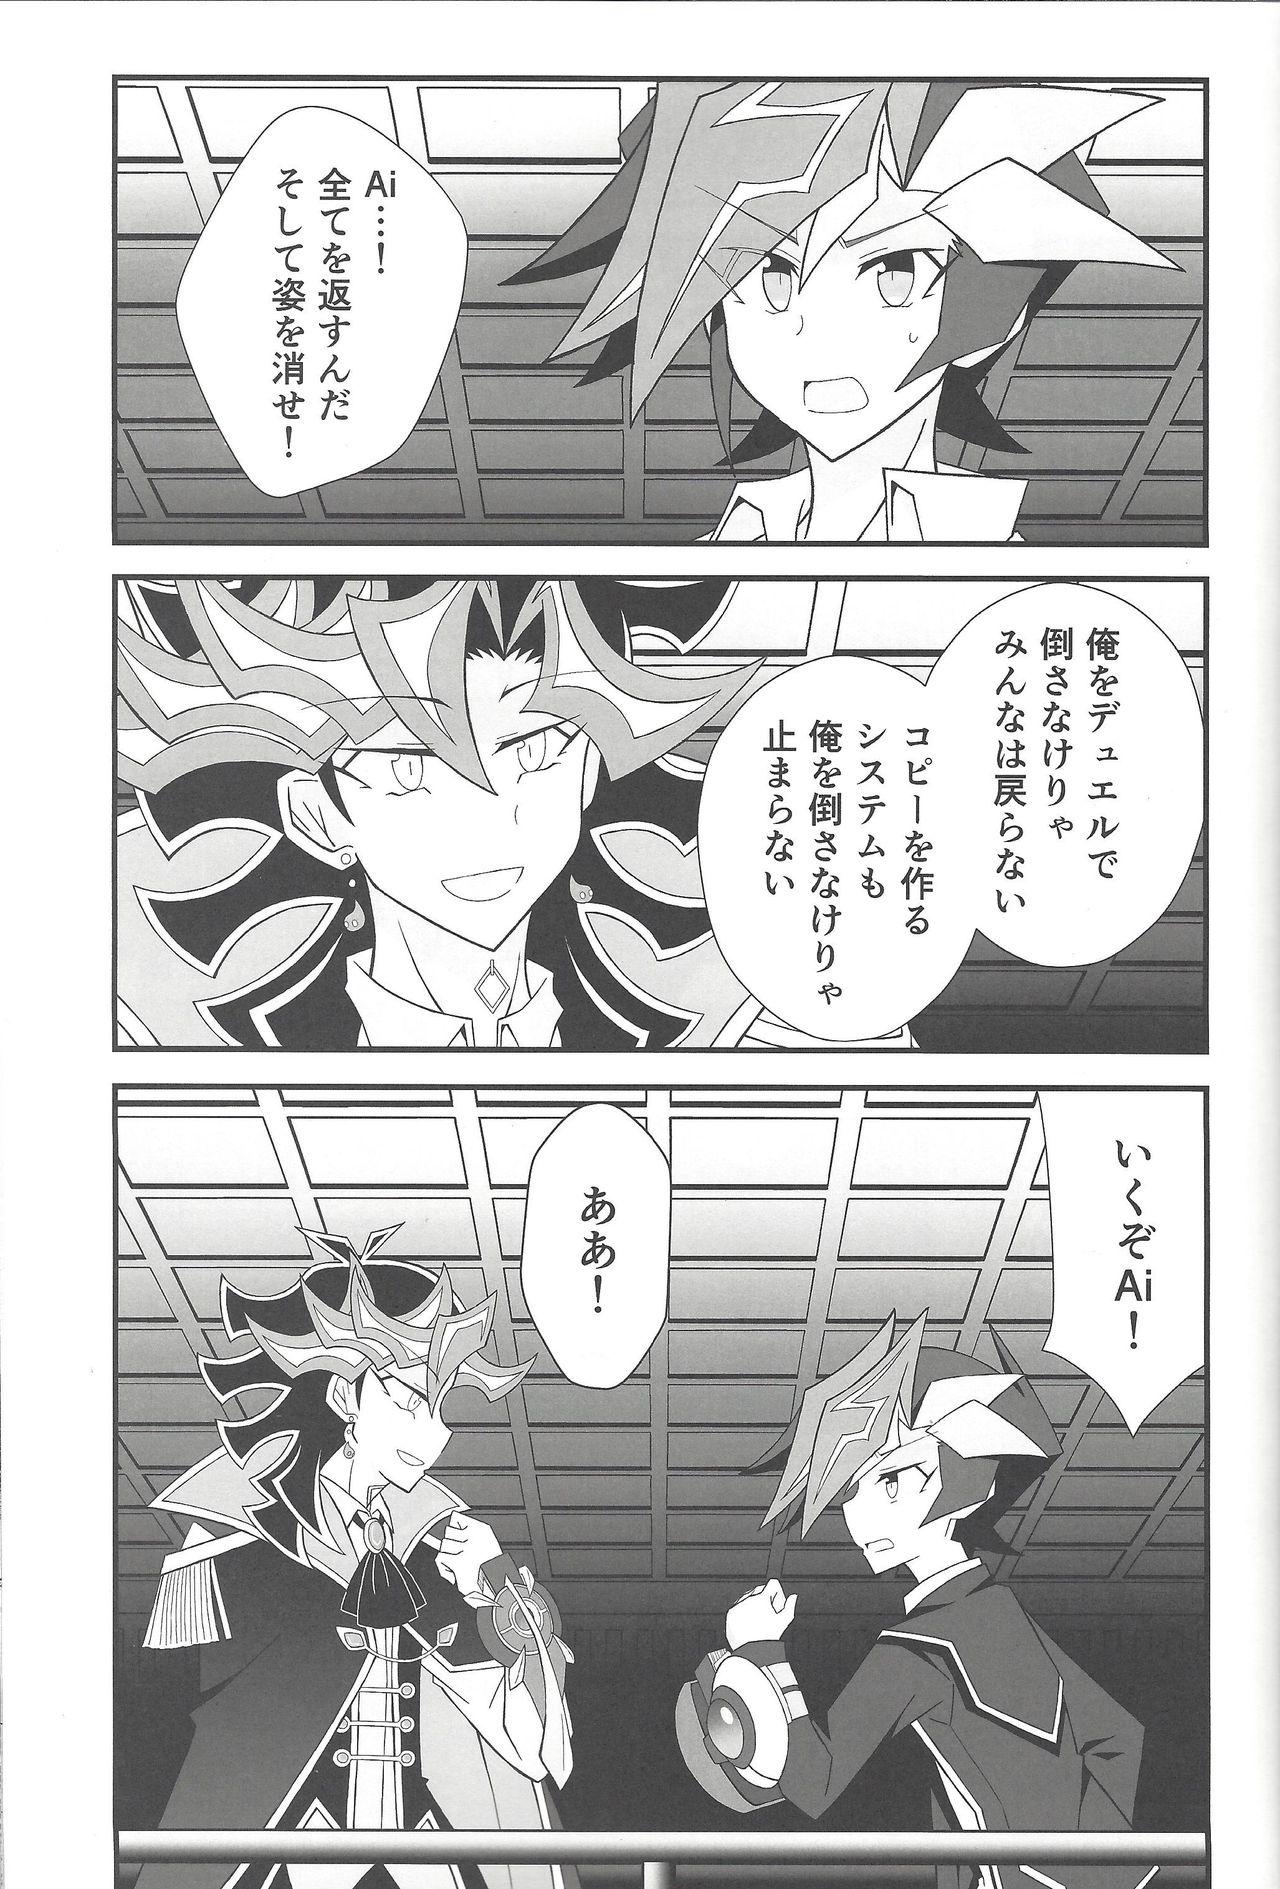 Grande Happy End - Yu gi oh vrains Anal - Page 3